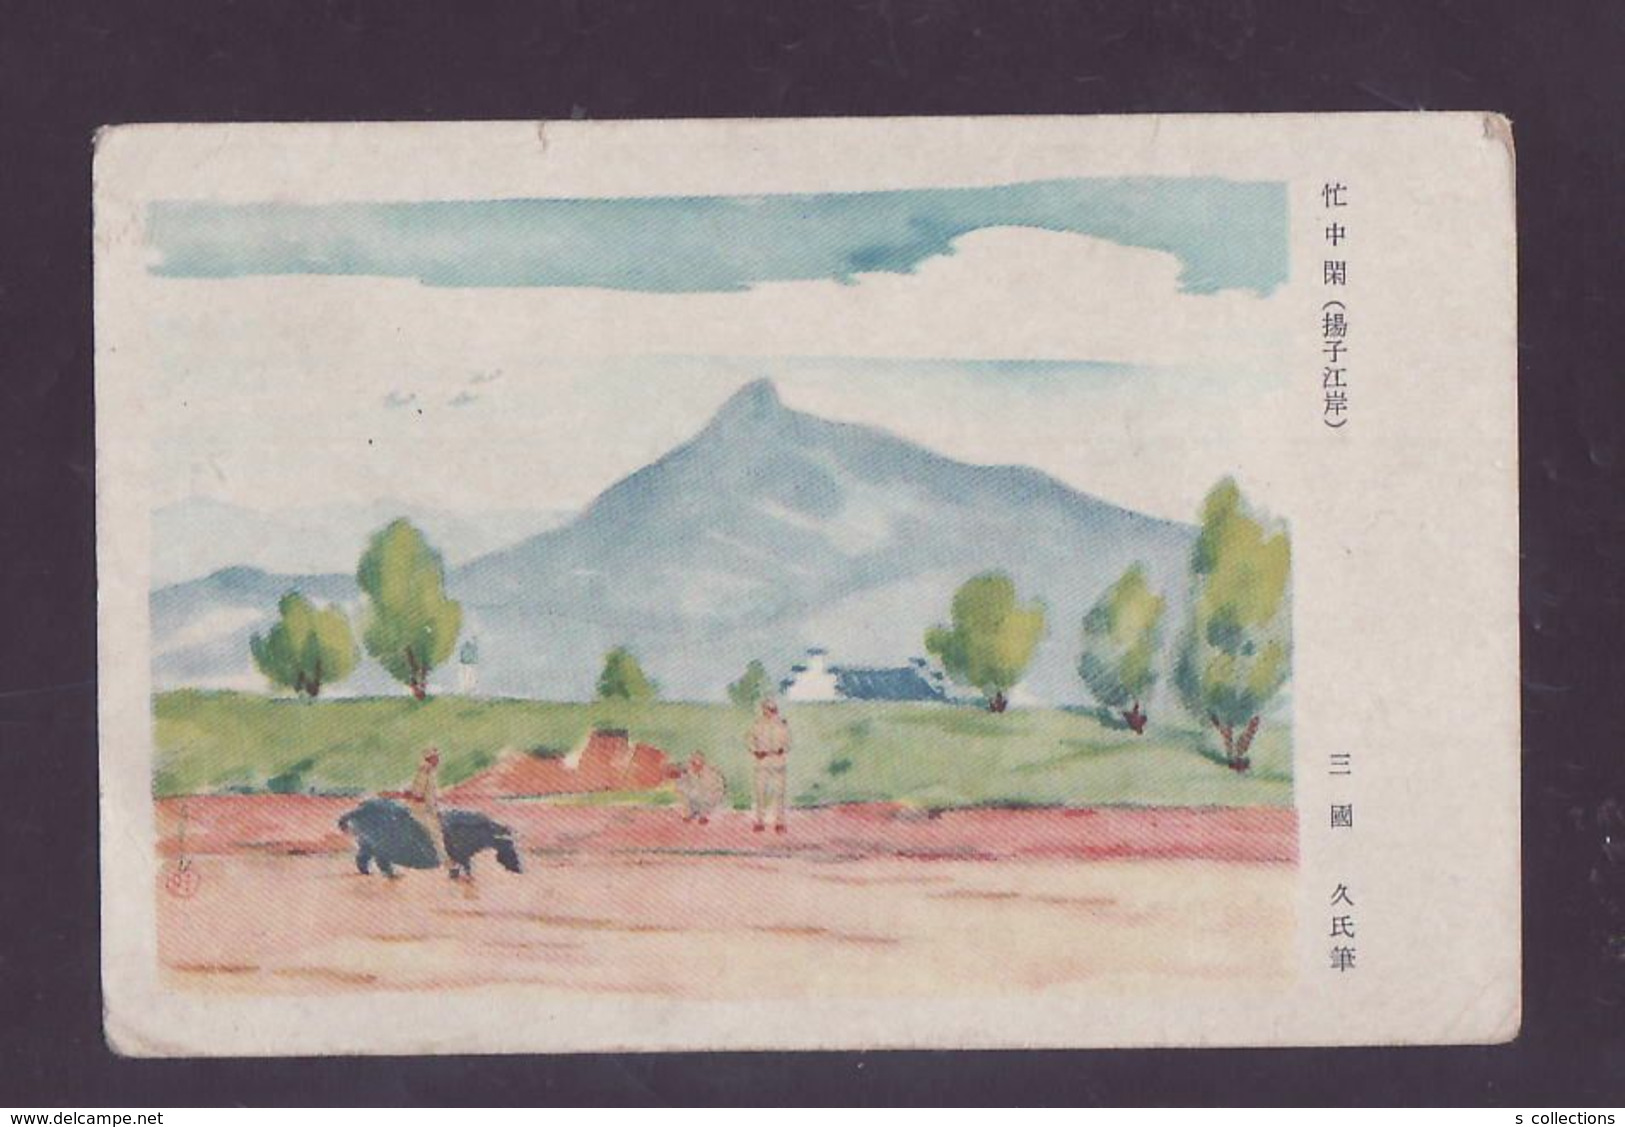 JAPAN WWII Military Yangtze River Bank Picture Postcard Central China WW2 MANCHURIA CHINE MANDCHOUKOUO JAPON GIAPPONE - 1943-45 Shanghai & Nankin